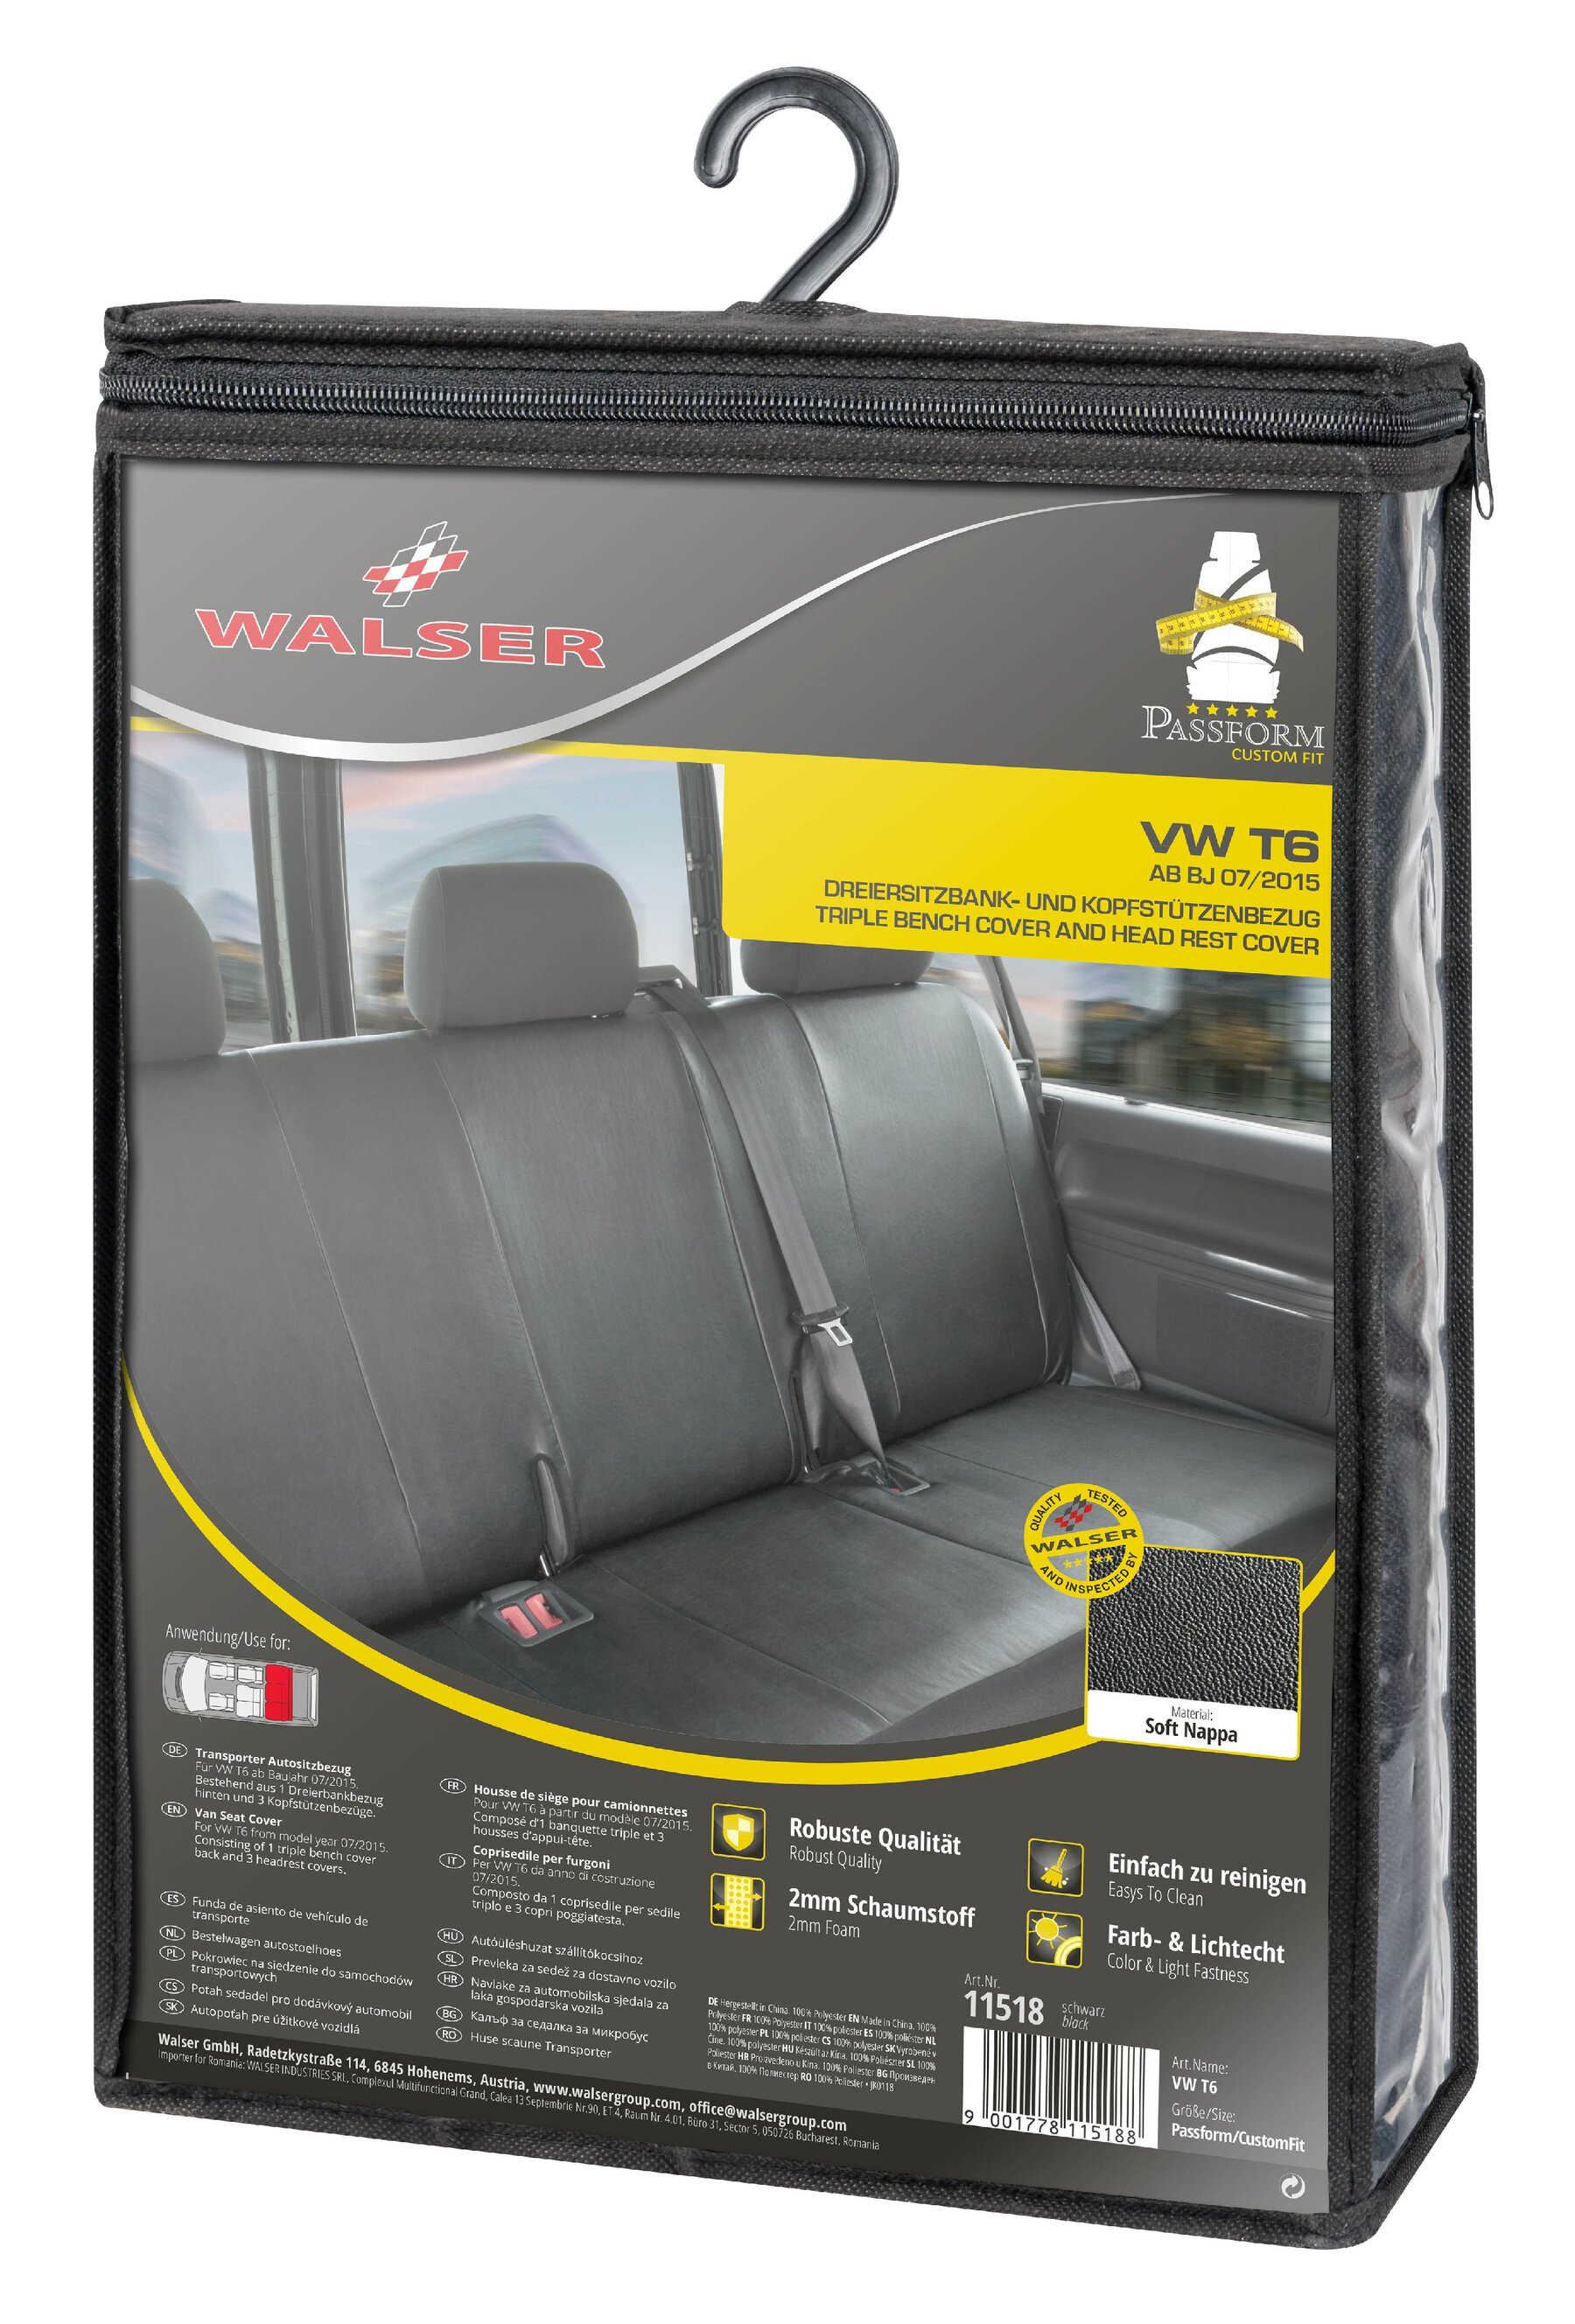 Car Seat cover Transporter made of imitation leather for VW T6, 3-seater bench